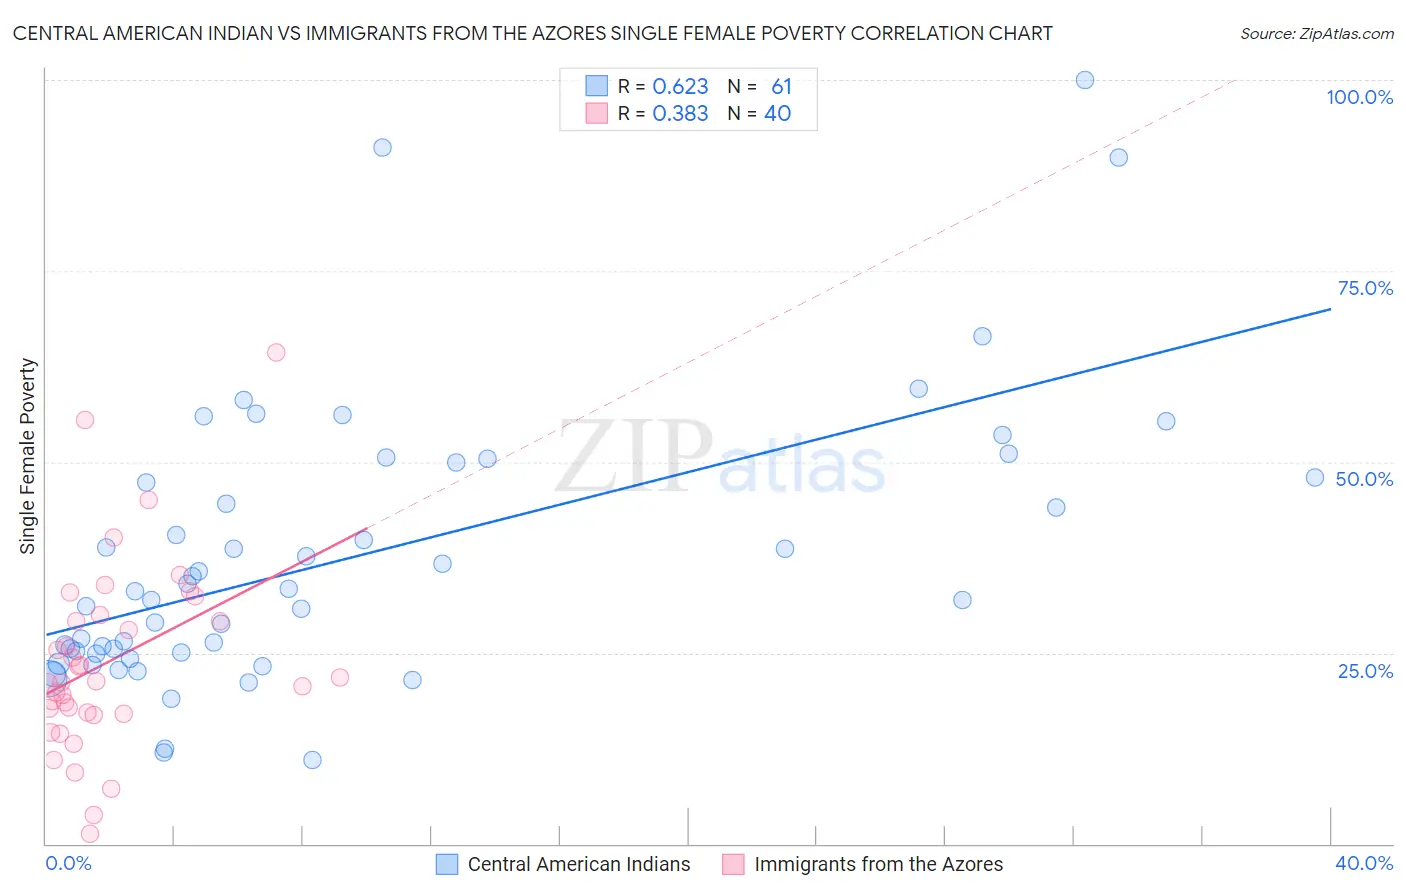 Central American Indian vs Immigrants from the Azores Single Female Poverty